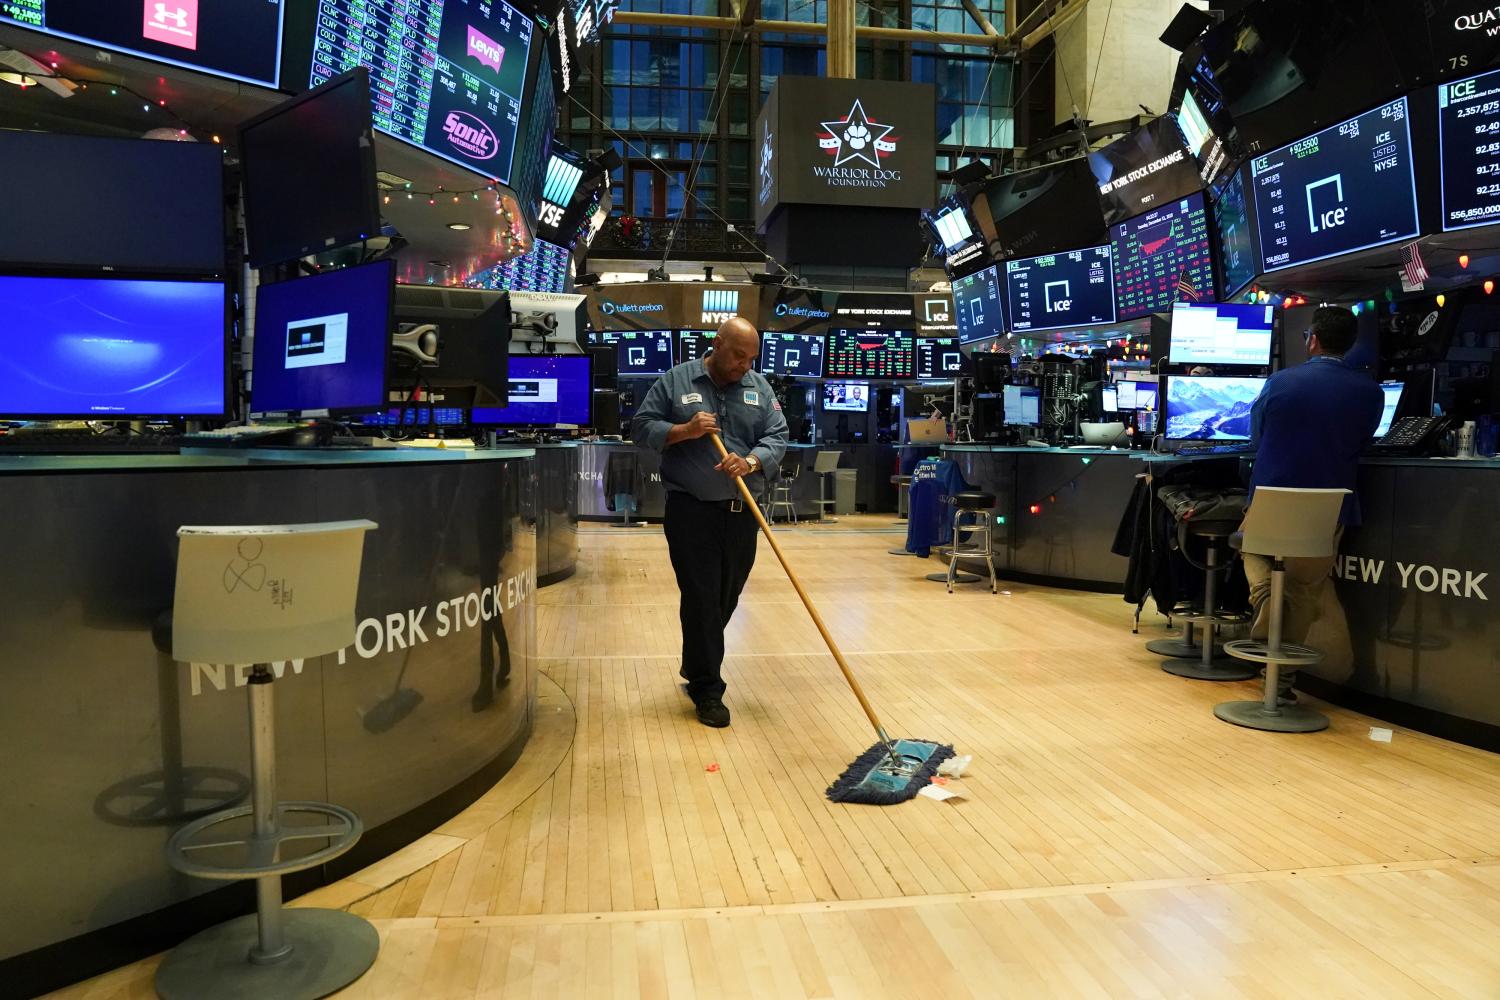 A maintenance worker sweeps the floor after the cling bell at the New York Stock Exchange (NYSE) in New York, U.S., December 31, 2019. REUTERS/Bryan R Smith